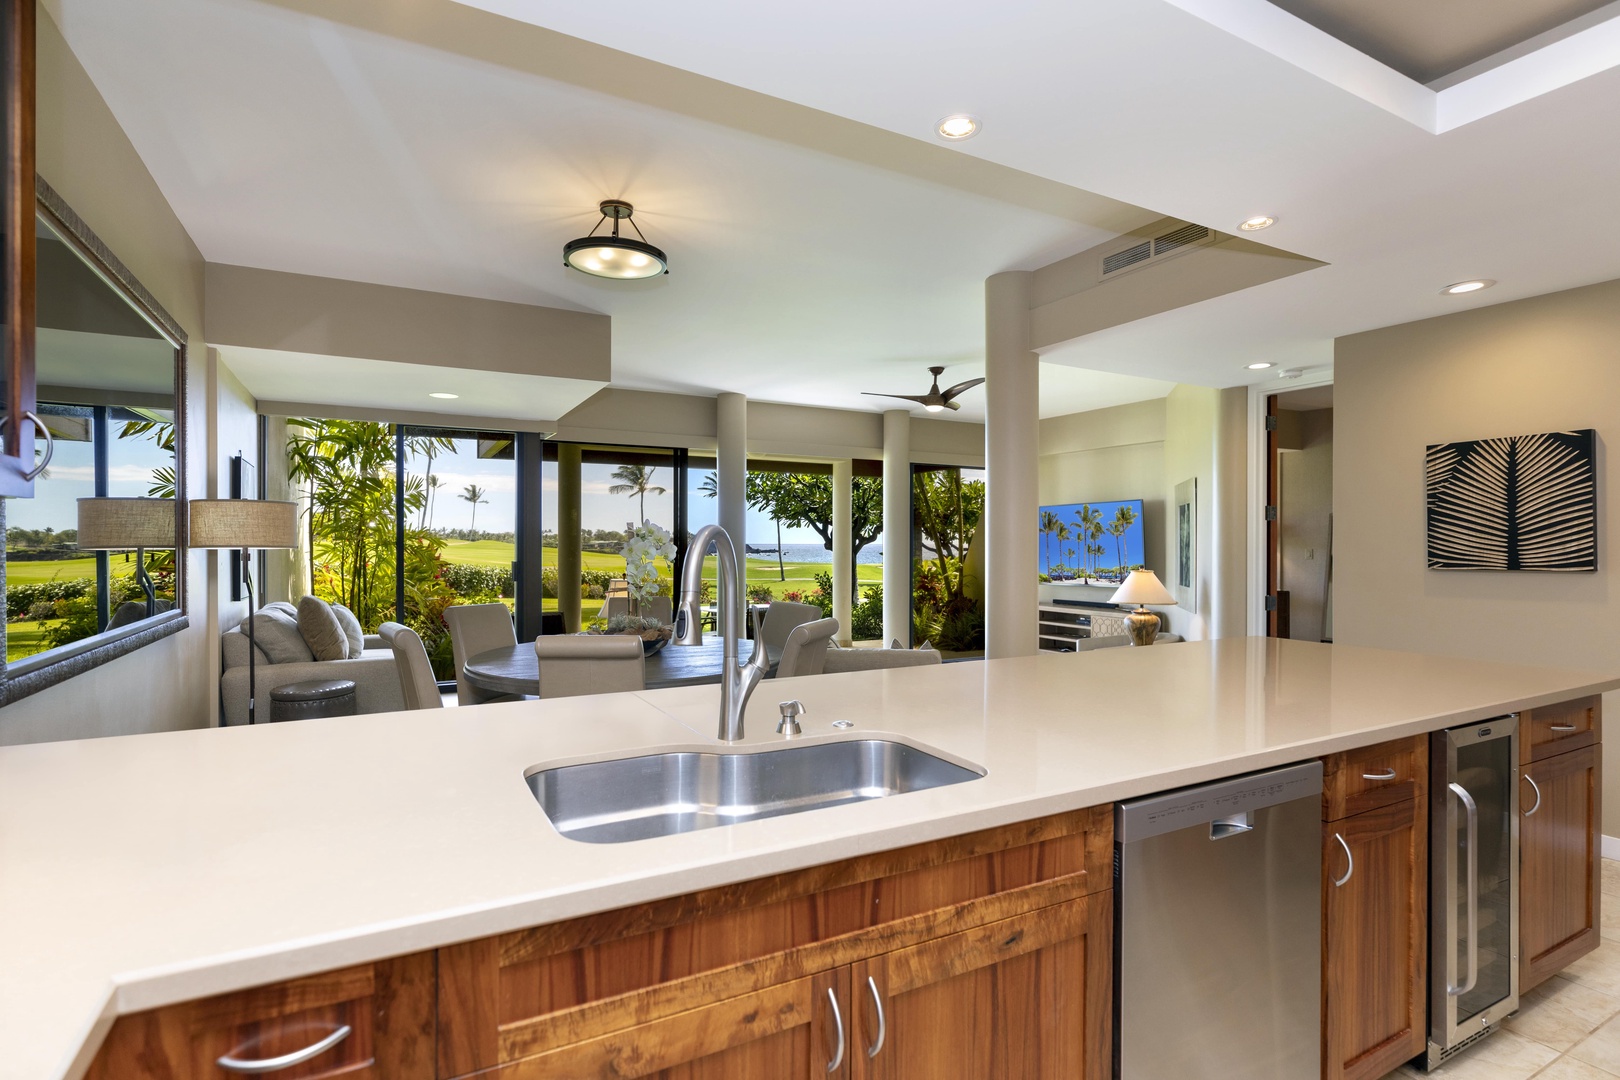 Kamuela Vacation Rentals, Mauna Lani Point E105 - Views from the kitchen while you prepare meals.